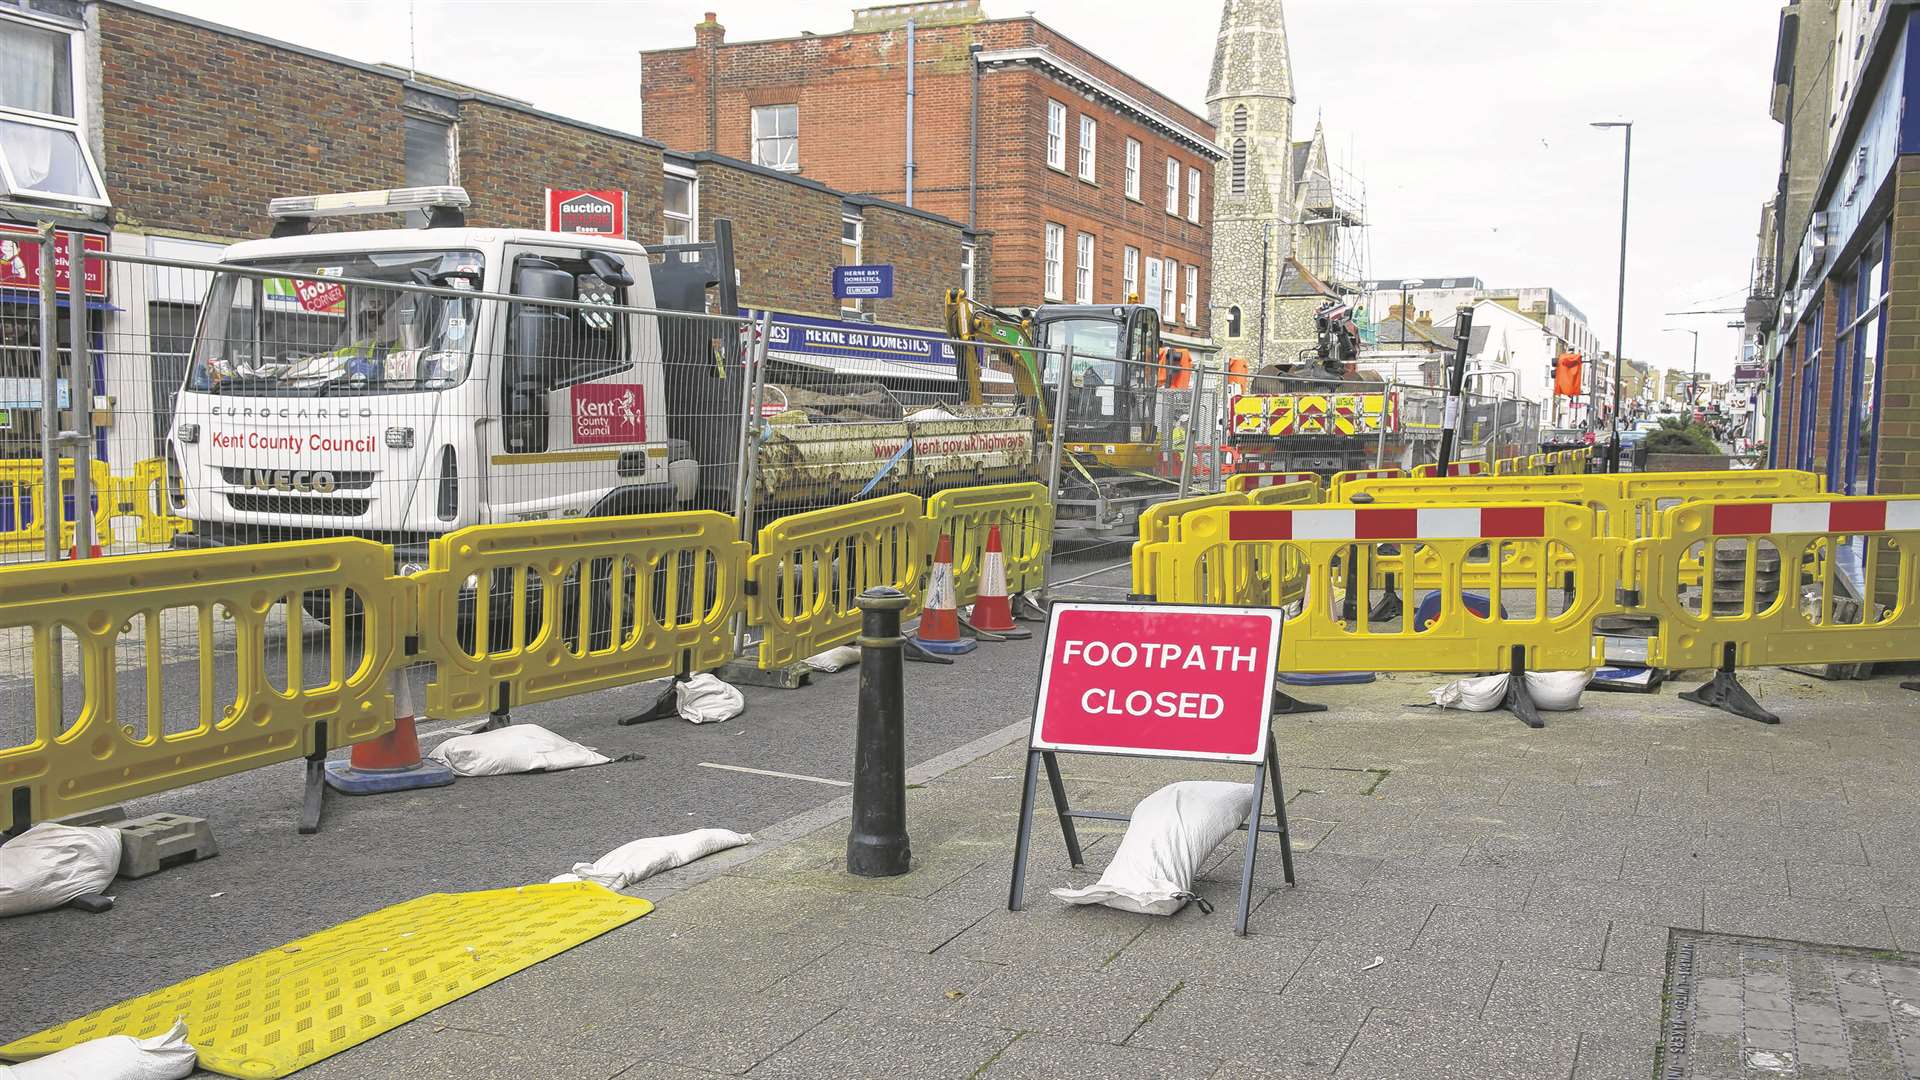 Work to repair the High Street finished last week